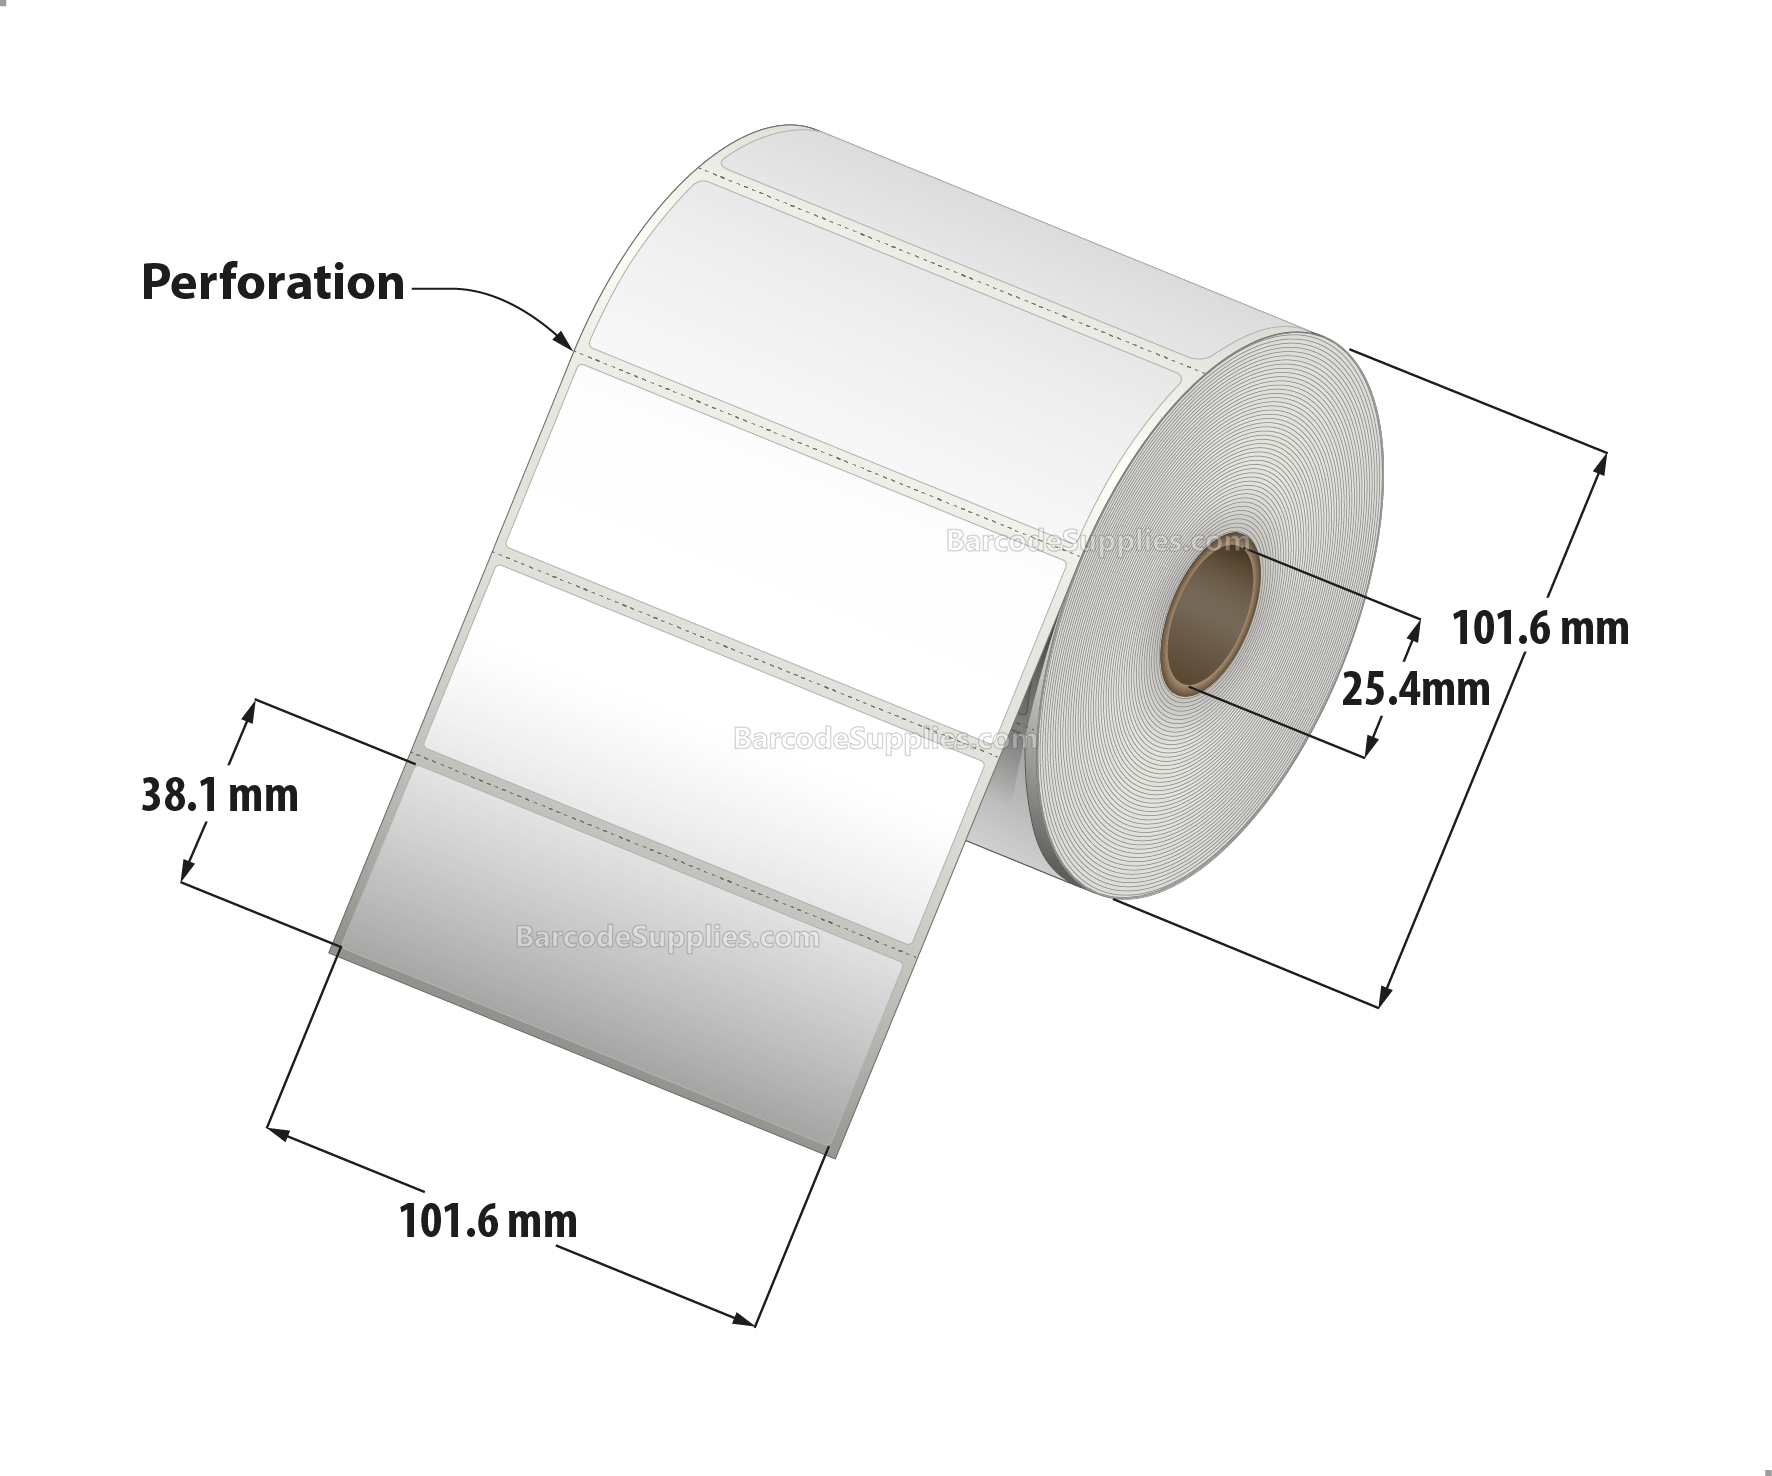 4 x 1.5 Direct Thermal White Labels With Rubber Adhesive - Perforated - 960 Labels Per Roll - Carton Of 12 Rolls - 11520 Labels Total - MPN: RDT4-400150-1P